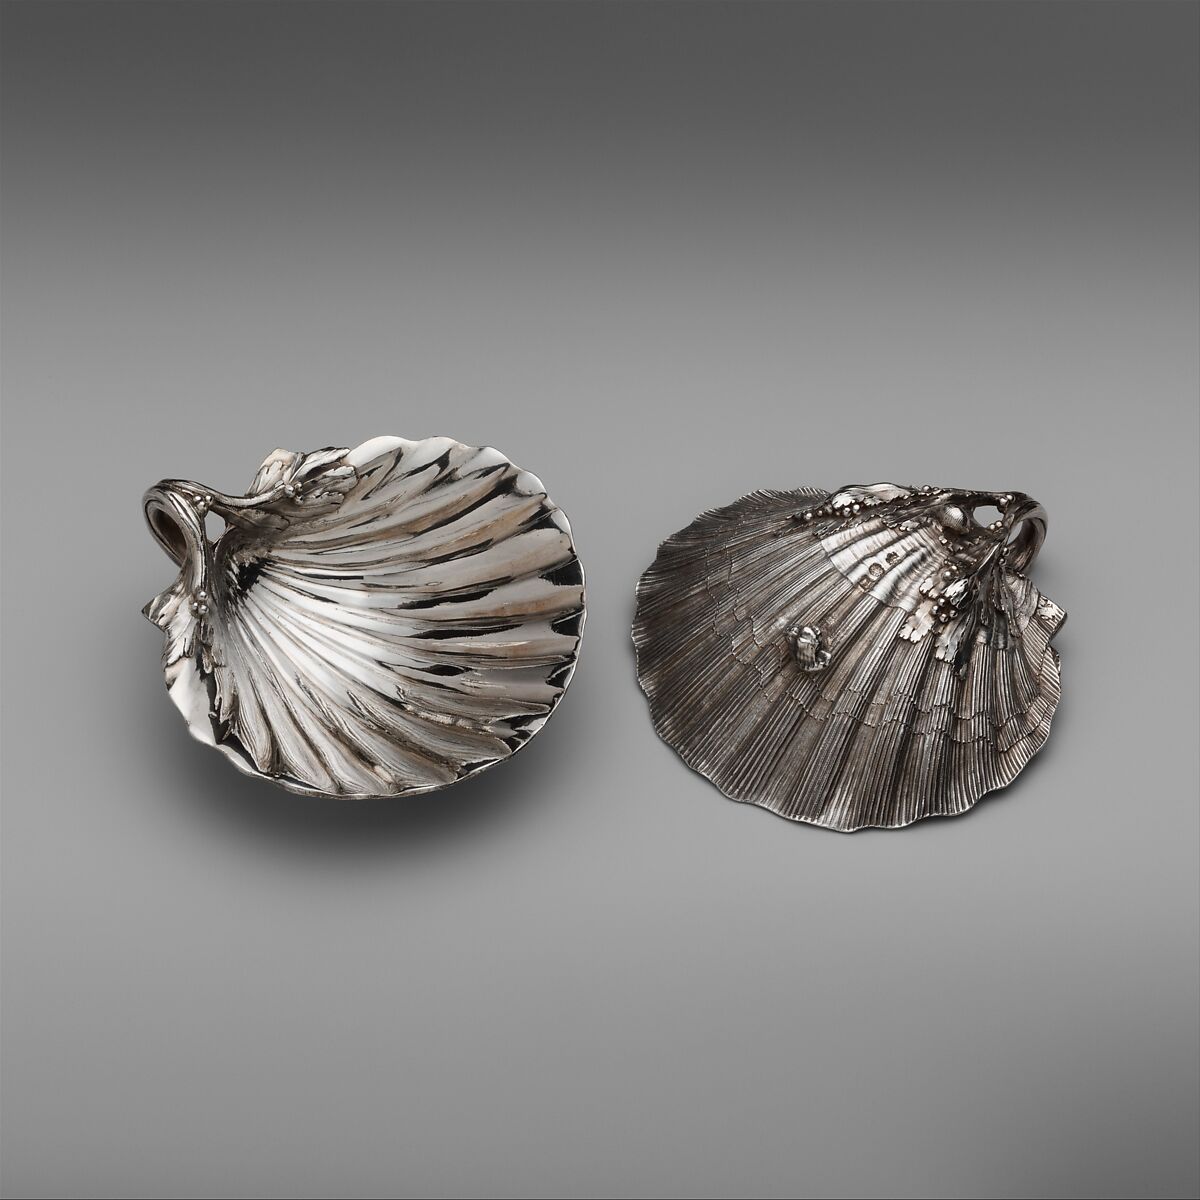 Pair of scallop-shell dishes, Jacques-Nicolas Roettiers (1736–1788, master 1765, retired 1777), Silver, French, Paris 